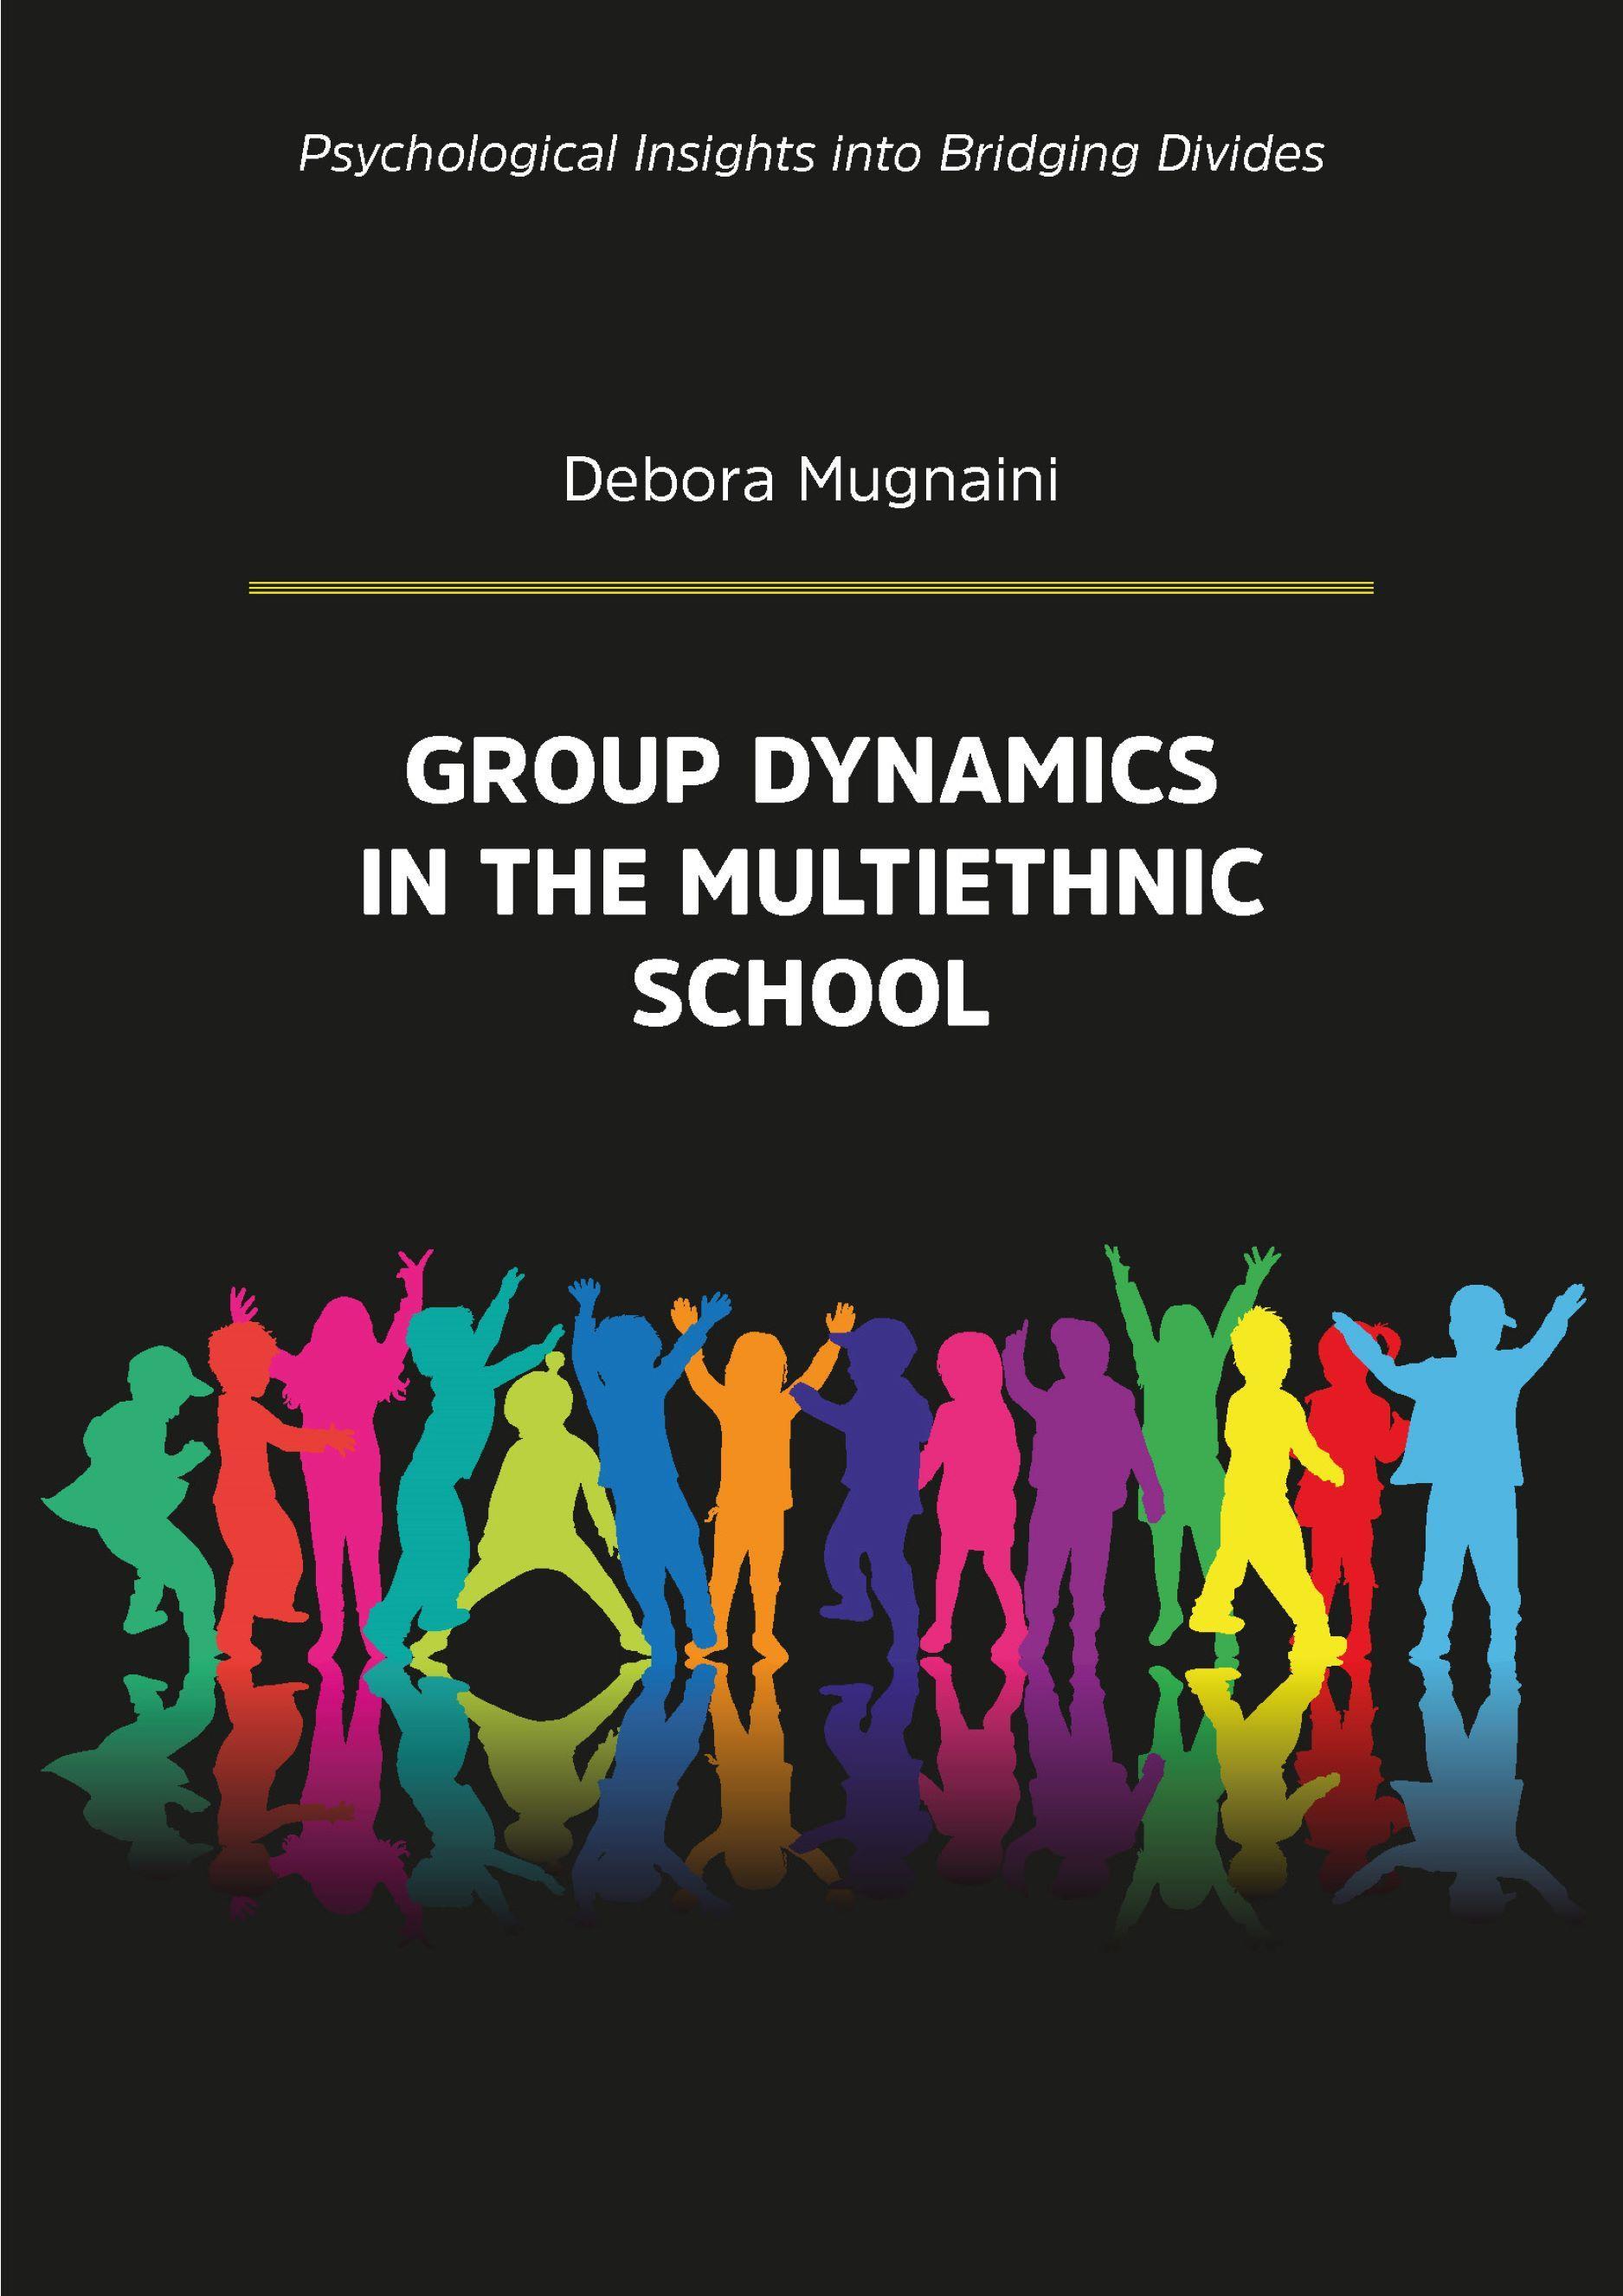 Group dynamics in the multiethnic school